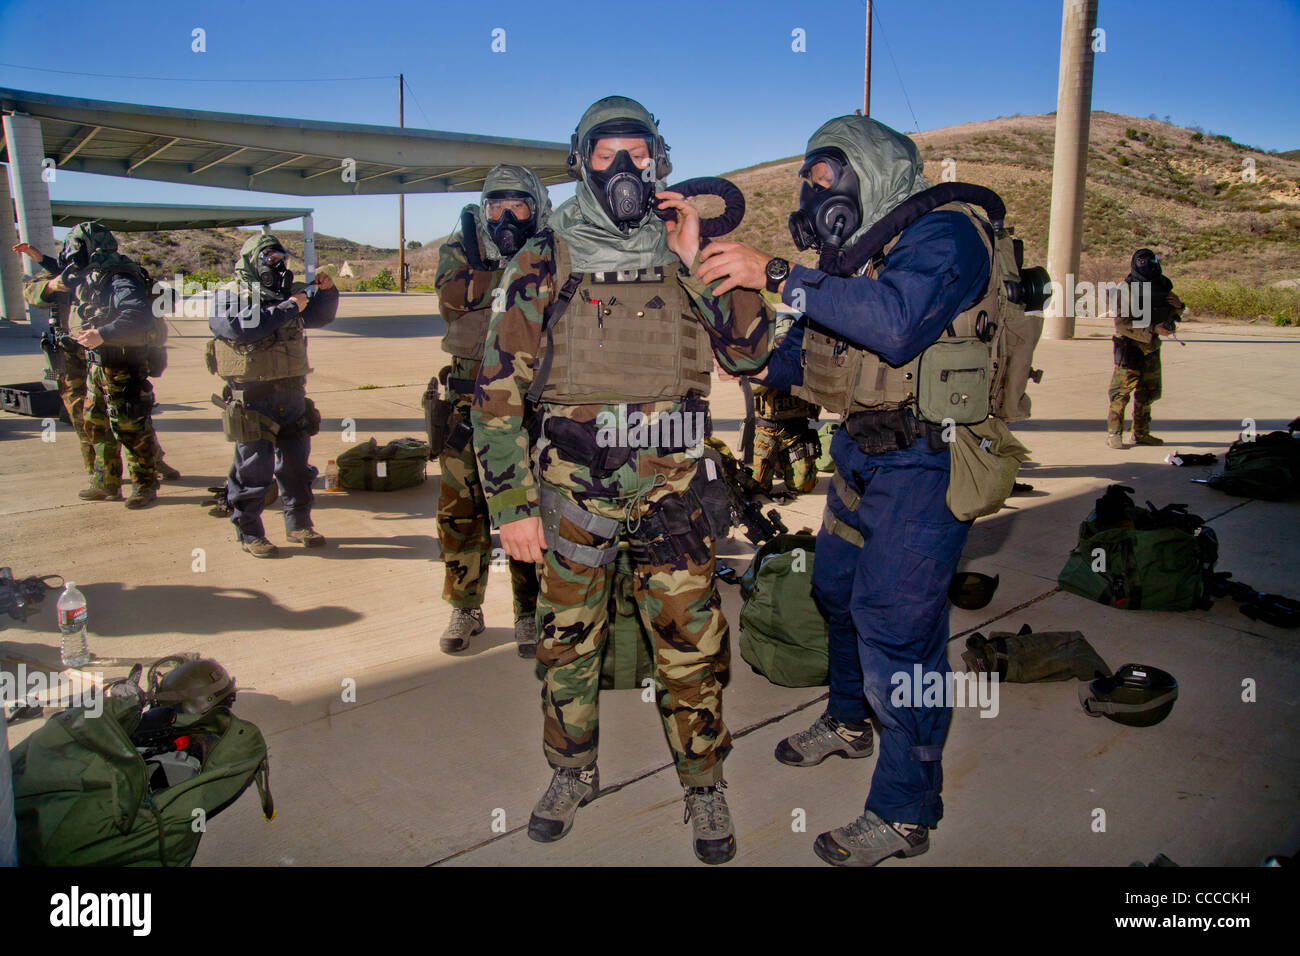 FBI SWAT (Special Weapons and Tactics) team members wear specialized 'Weapons of Mass Destruction' equipment for training drills Stock Photo